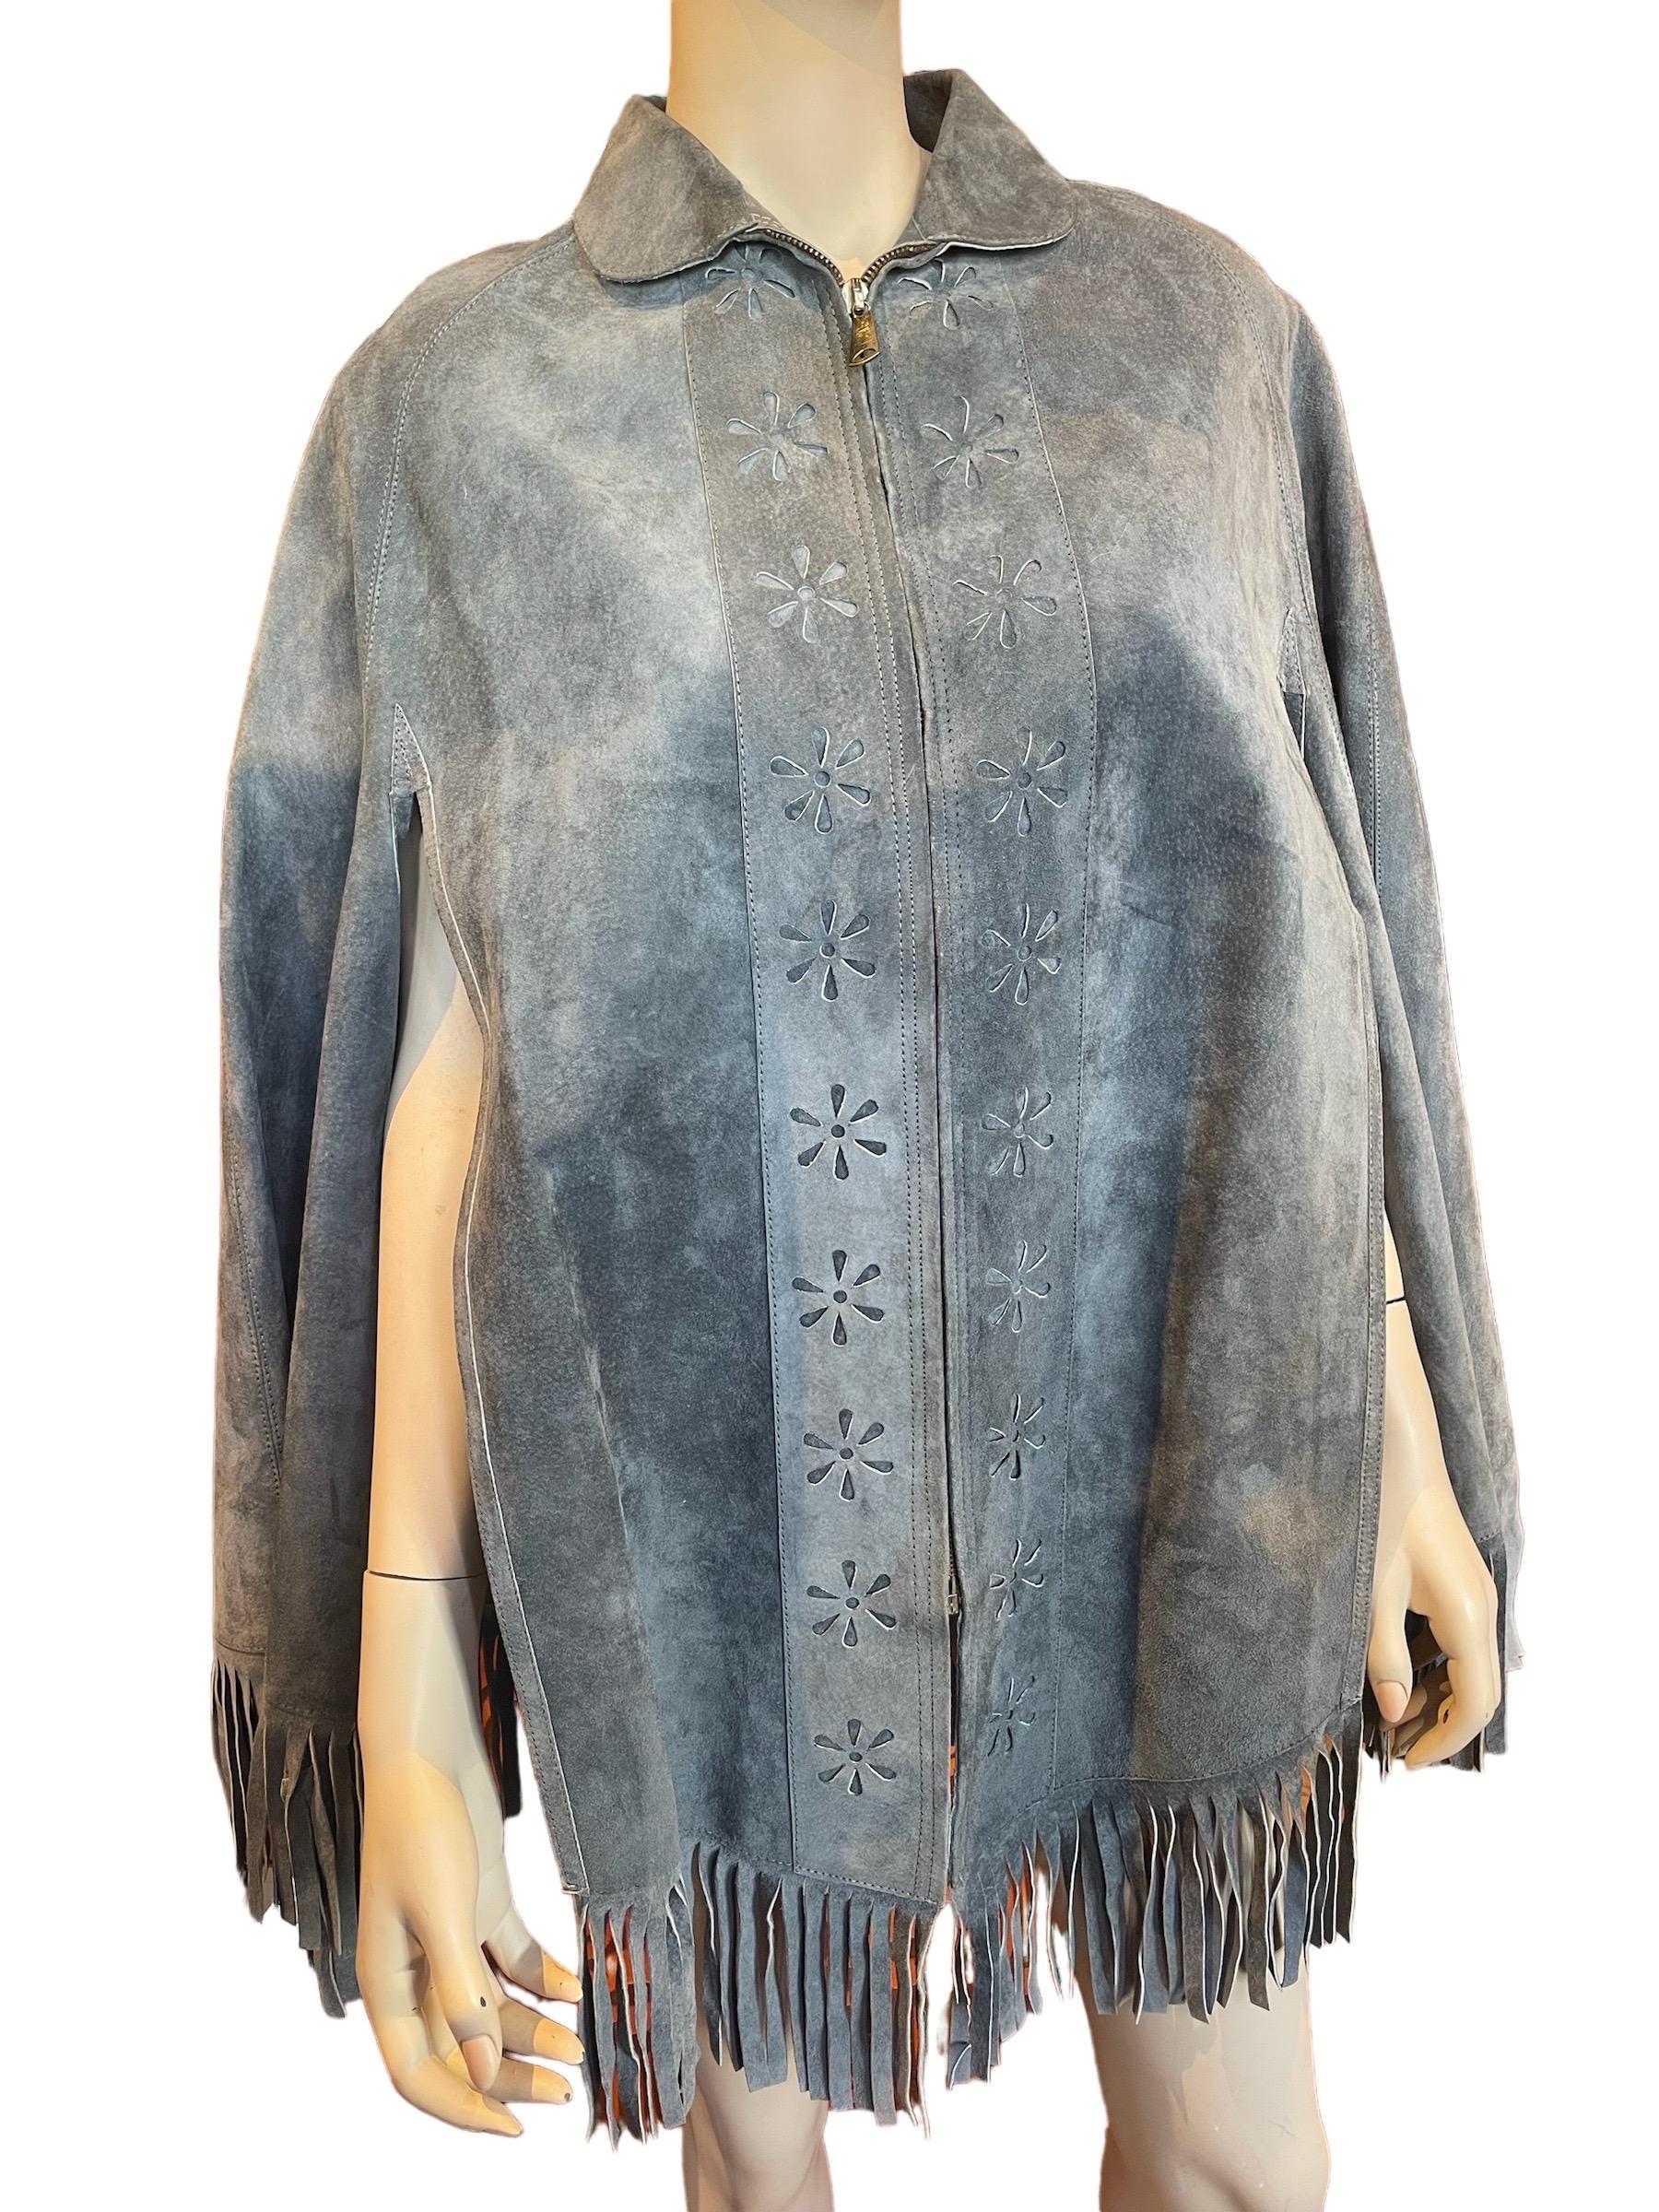 1970s Grey Blue Suede Fringed Zip Up Poncho with Flower Details 

An amazing grey blue suede collared poncho, with fringe and flower details along the zipper. Has two arm slits. 

One Size Fits Most 